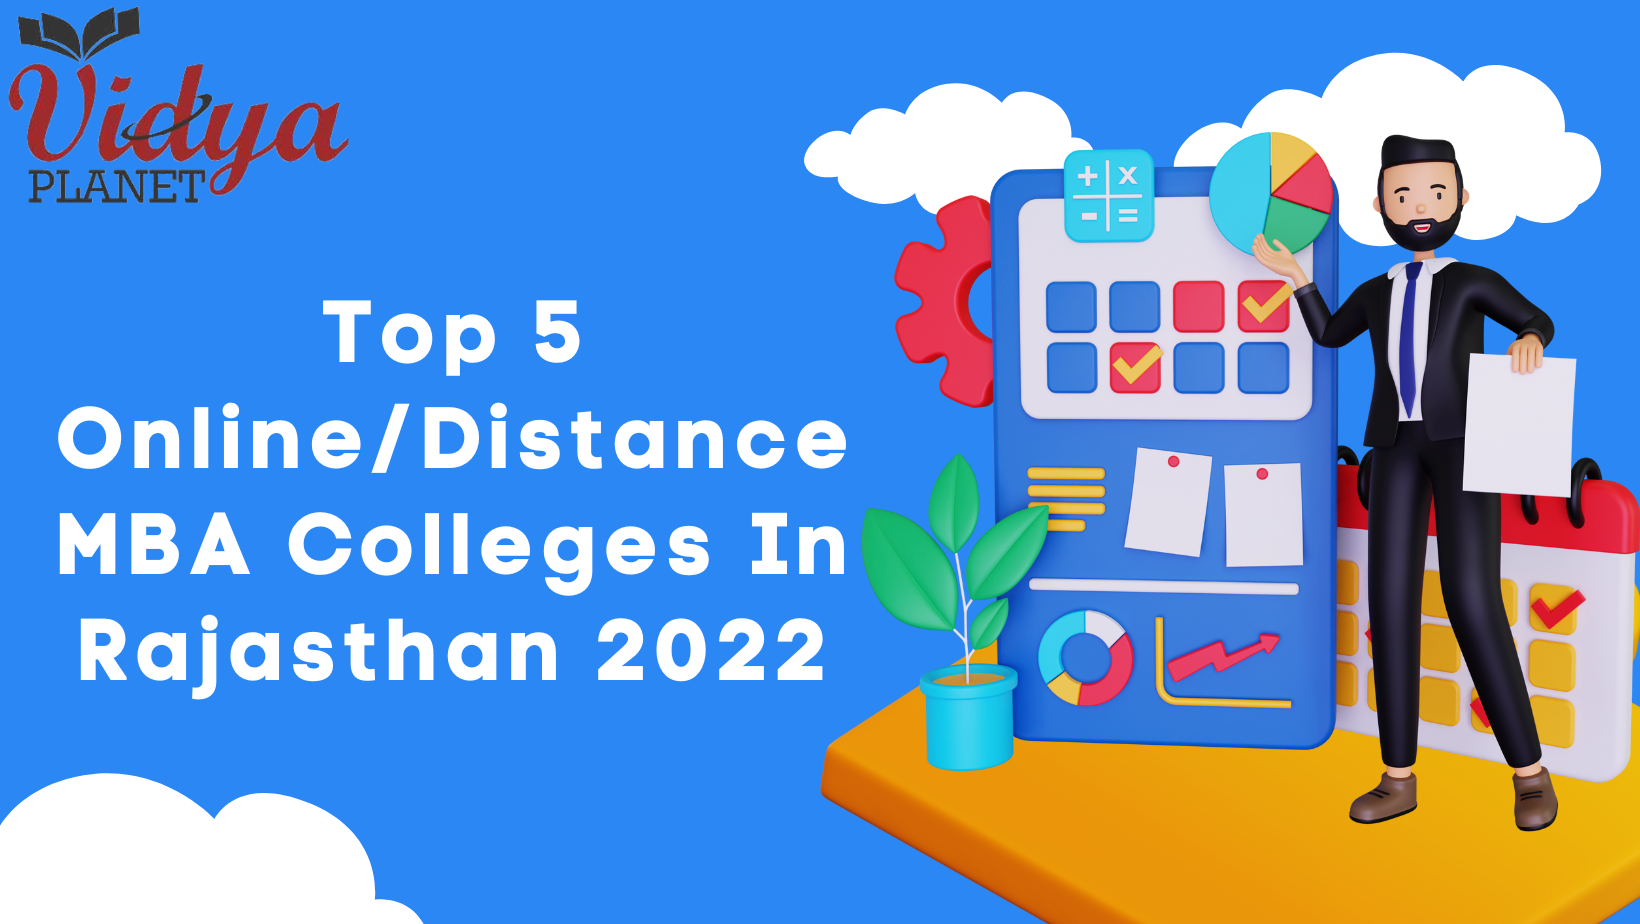 Top 5 Online/Distance MBA Colleges In Rajasthan 2022